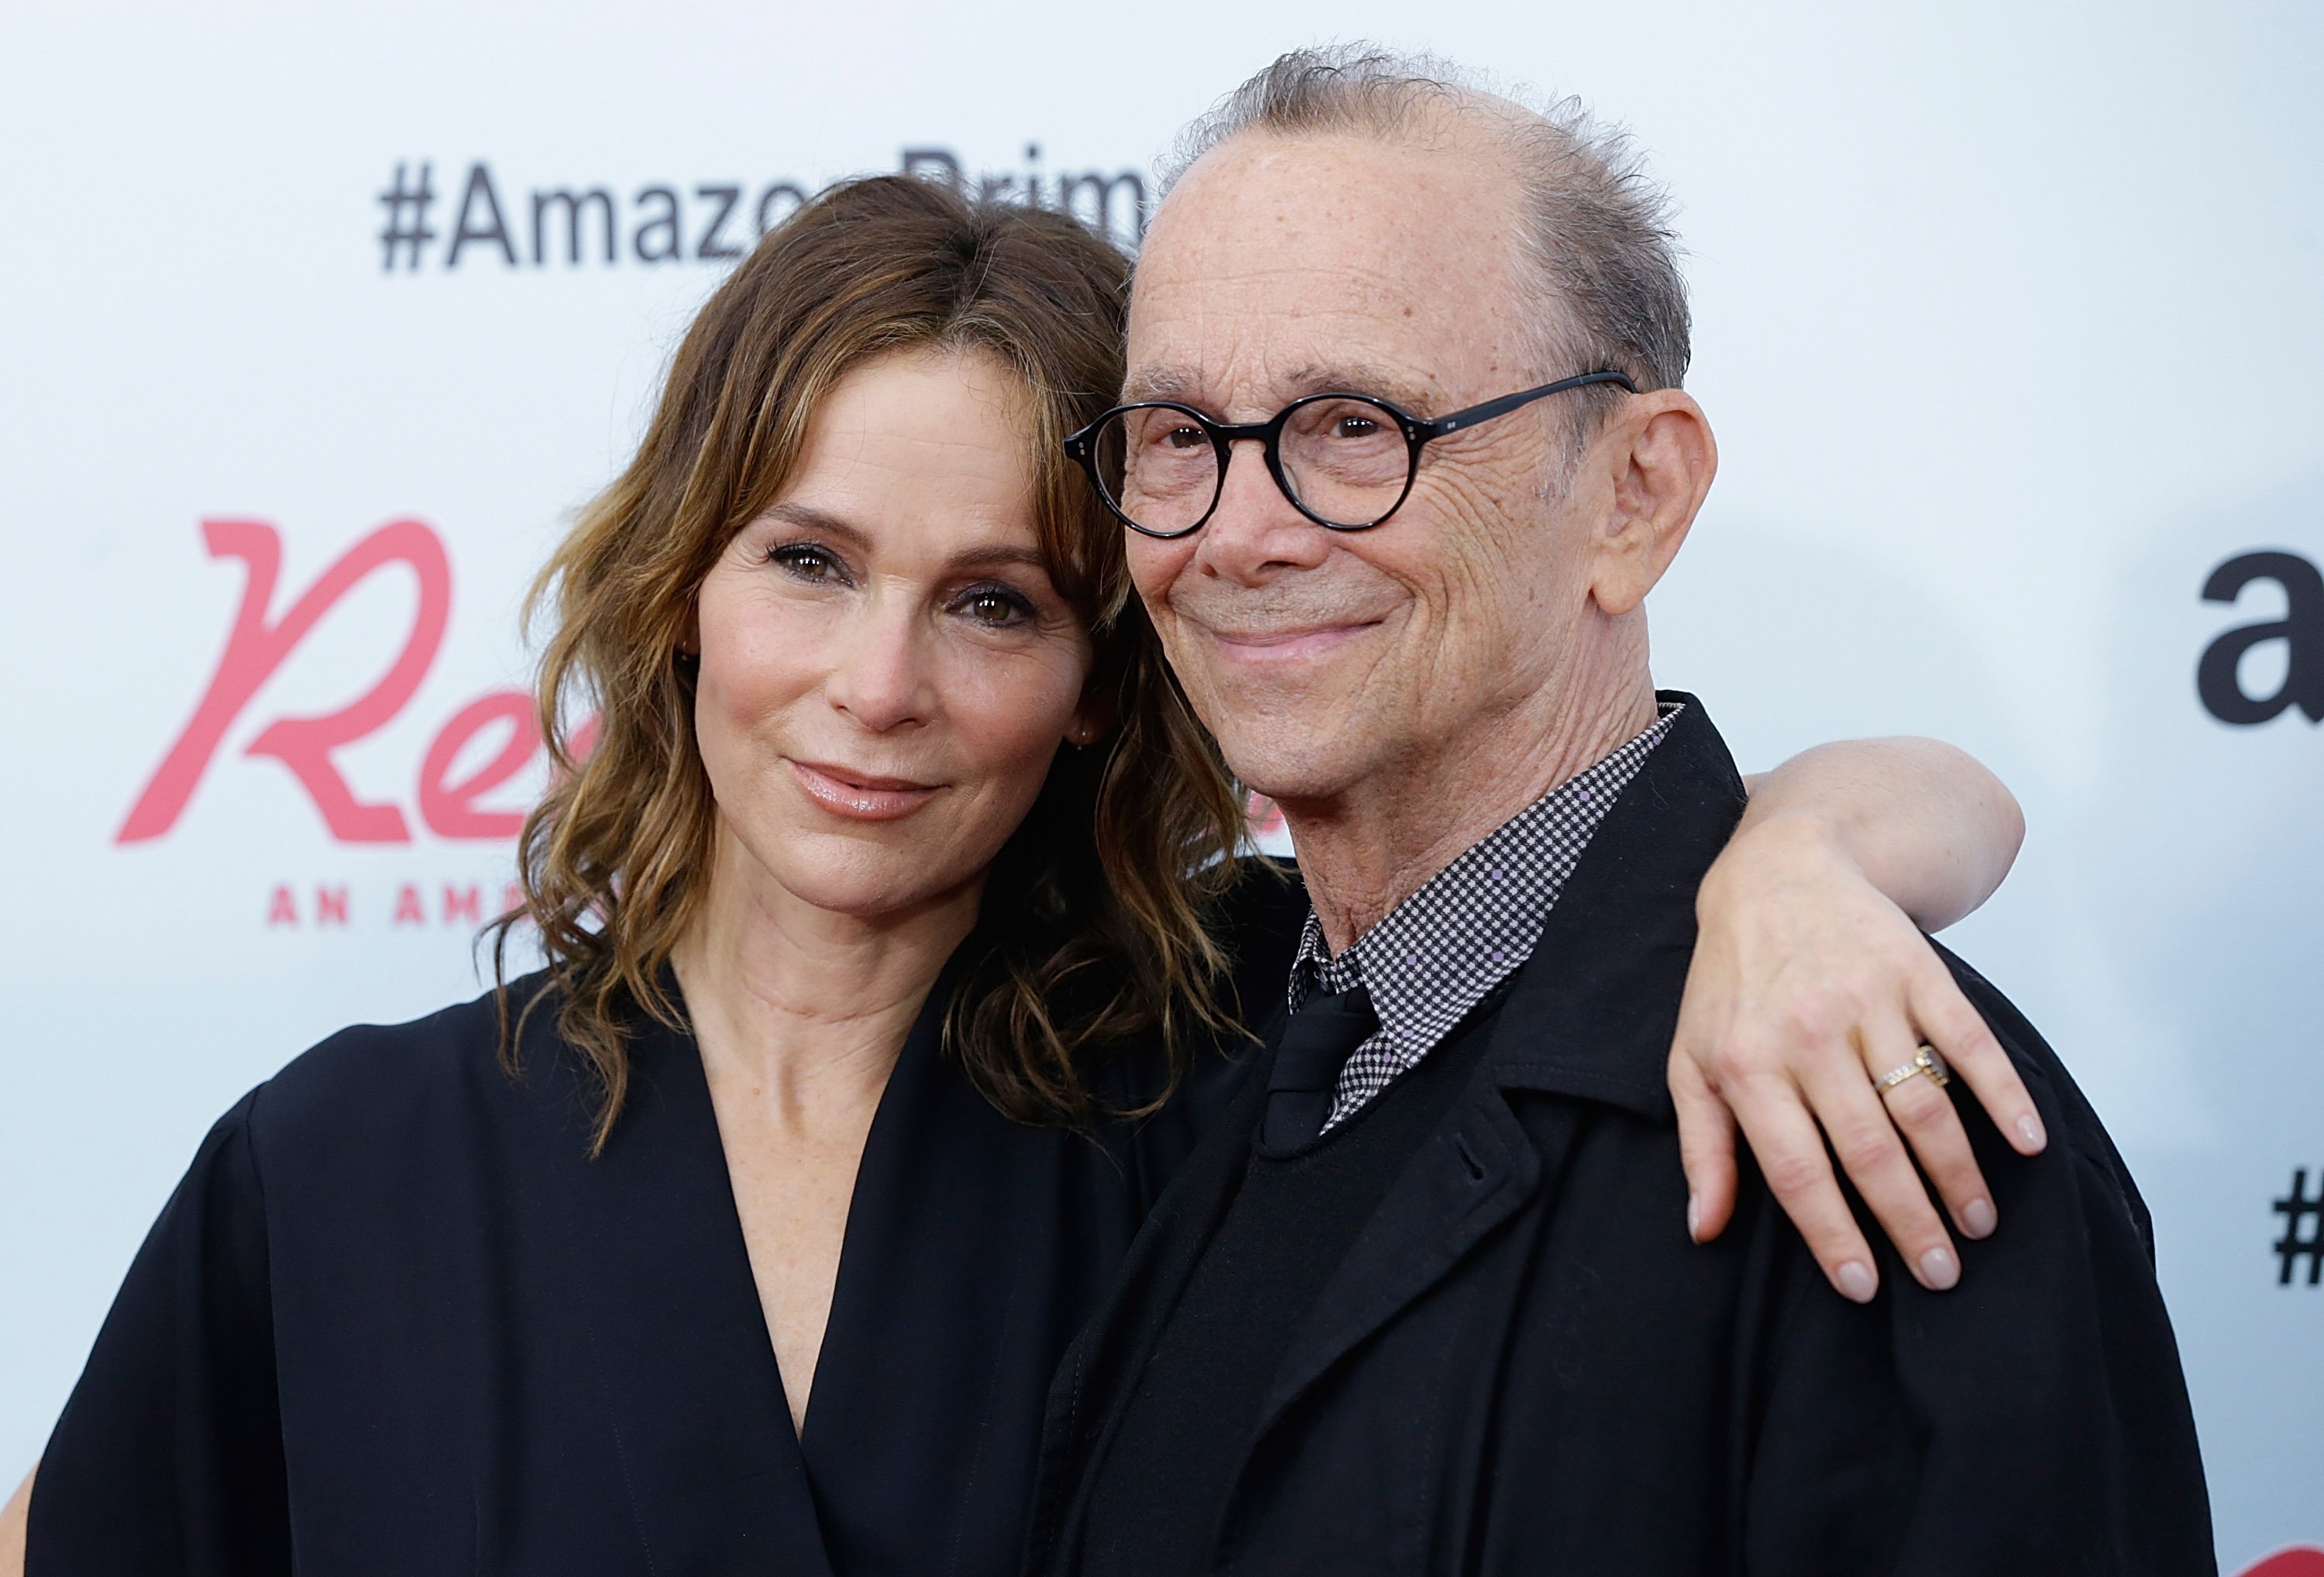 Jennifer Grey and Joel Grey attend "Red Oaks" series premiere at Ziegfeld Theater on September 29, 2015 in New York City. | Source: Getty Images